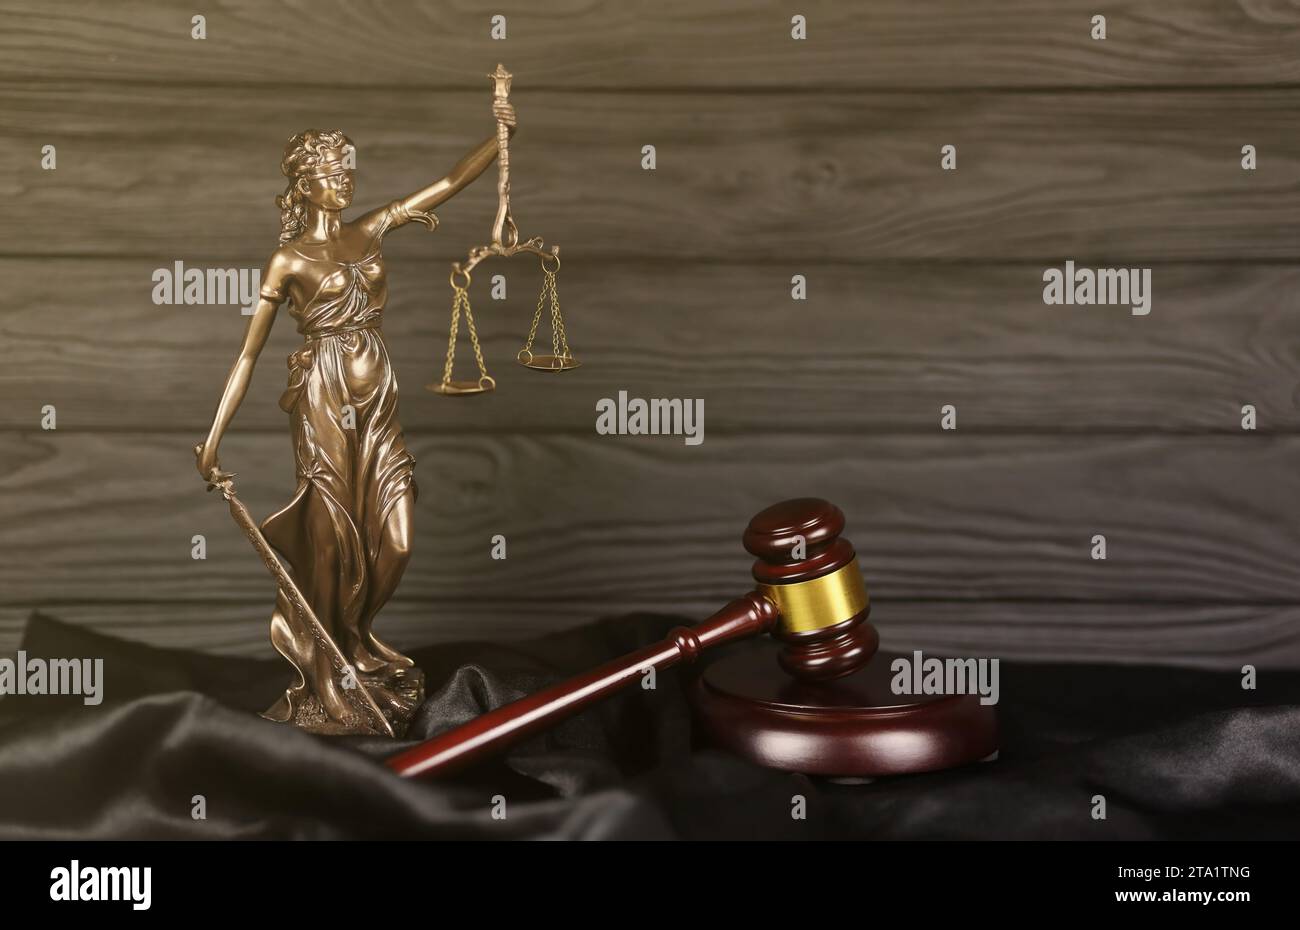 The Statue of Justice - lady justice or justitia the Roman goddess of Justice. Statue on brown book with judge gavel. Concept of judicial trial, courtroom process and lawyers occupation Stock Photo